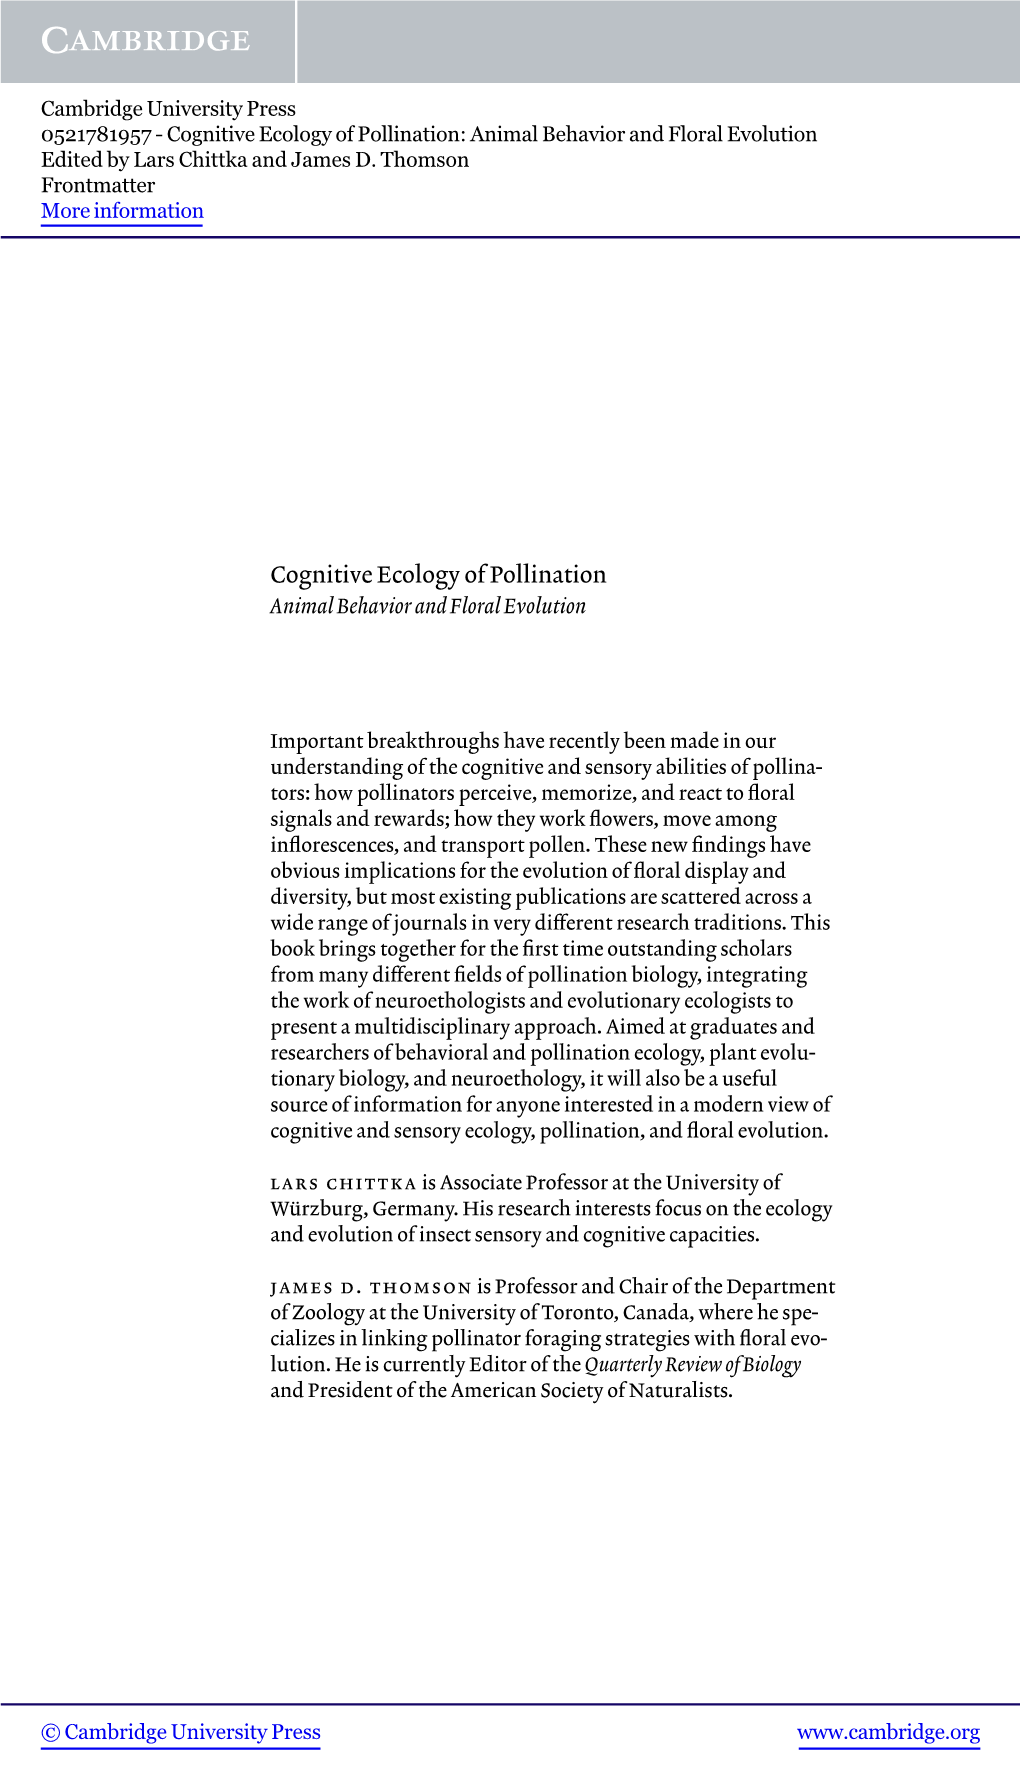 Cognitive Ecology of Pollination: Animal Behavior and Floral Evolution Edited by Lars Chittka and James D